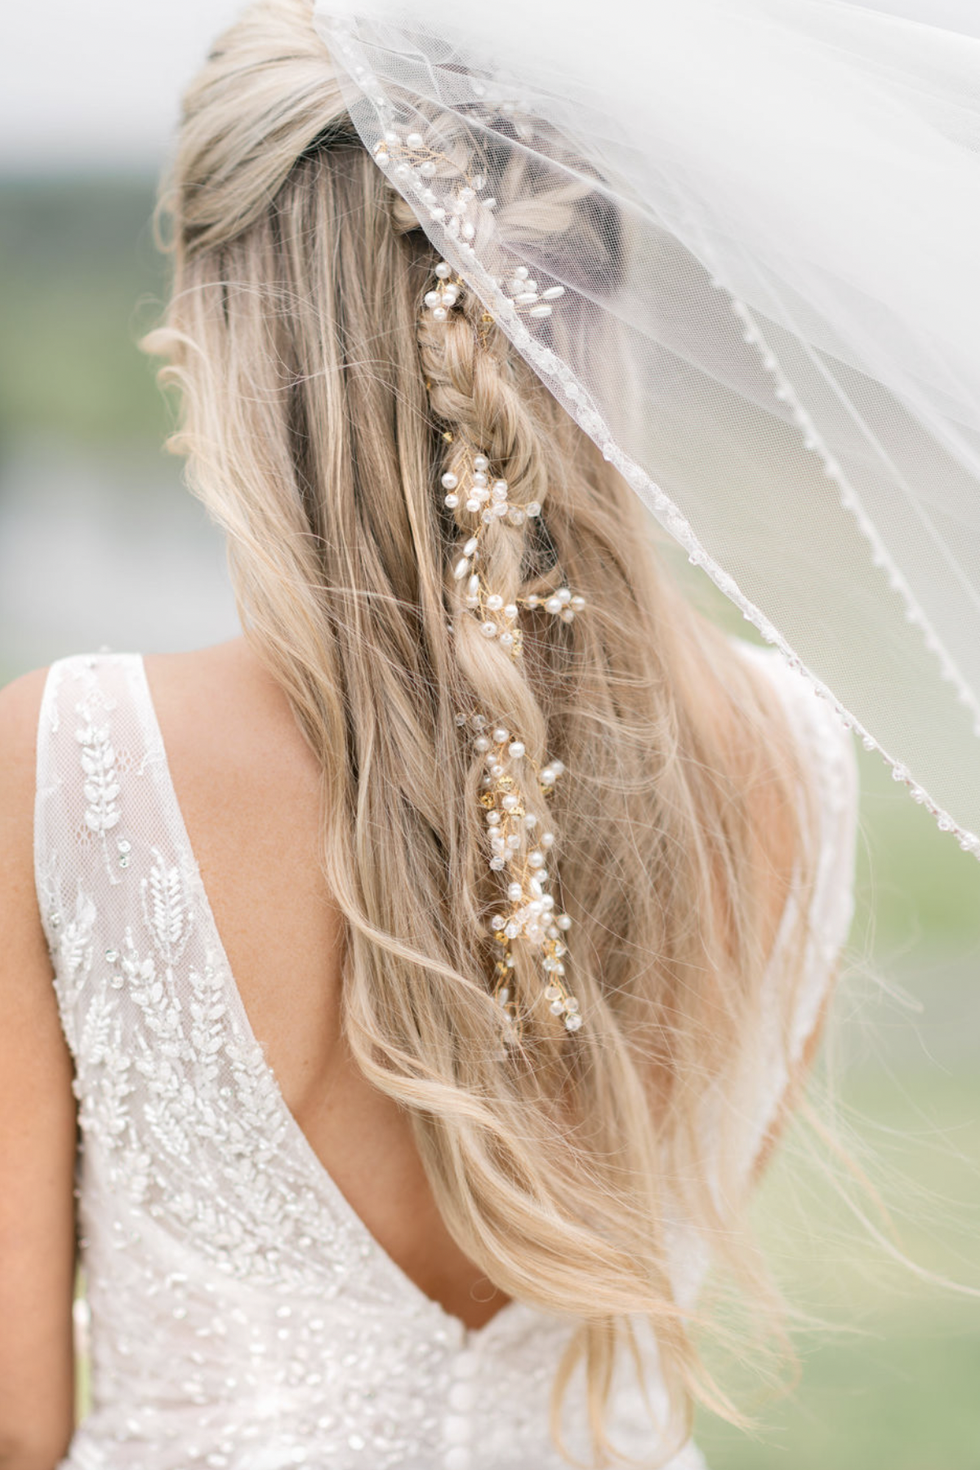 https://hips.hearstapps.com/hmg-prod/images/wedding-hairstyles-long-hair-twist-1676559084.png?crop=0.9356178608515057xw:1xh;center,top&resize=980:*